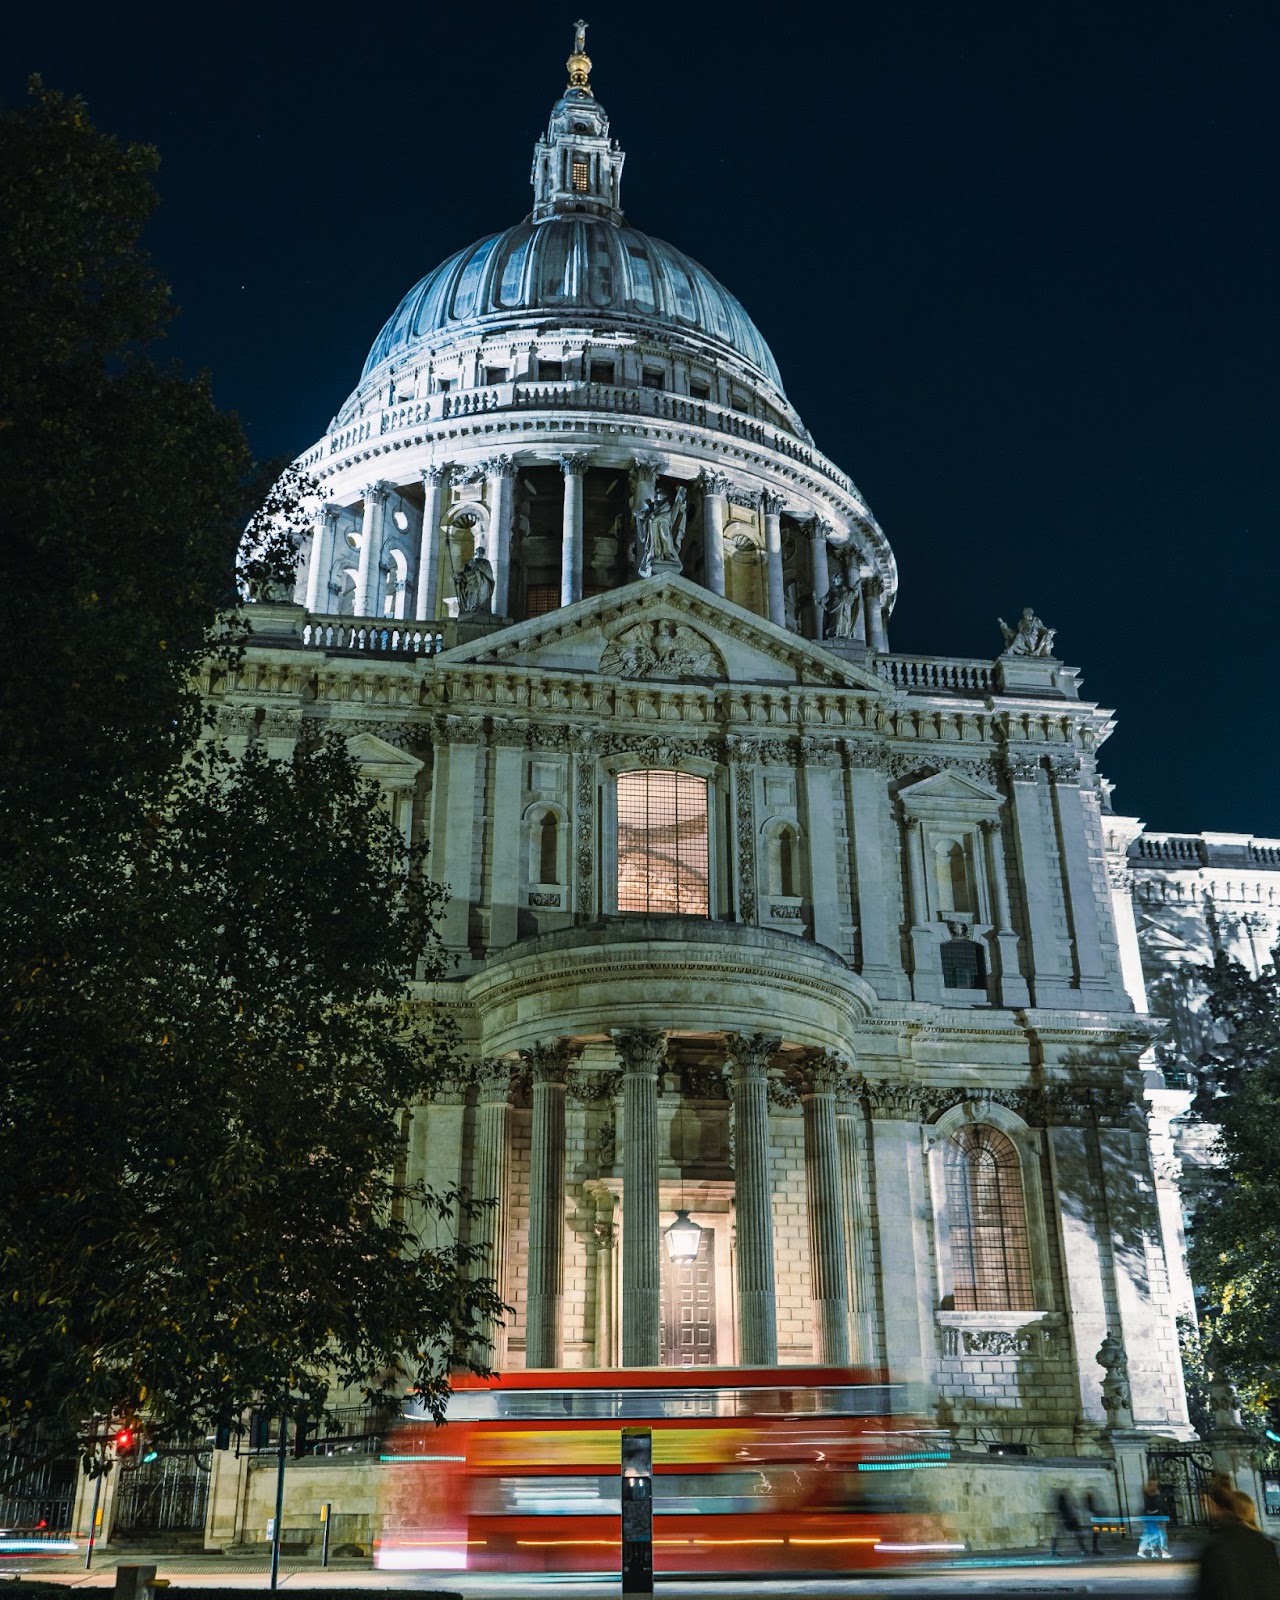 Residents At London’s Atlas Building Benefit From Views Of St Paul's Cathedral According To City Road Sales And Letting Agent Austin Homes